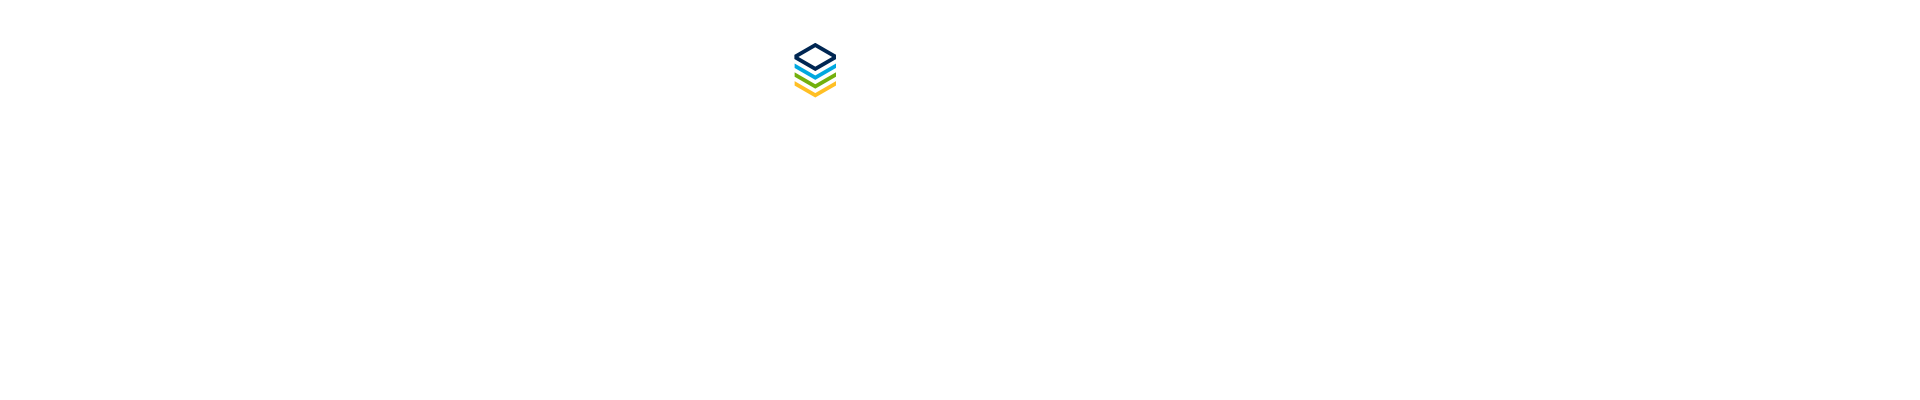 your most powerful platform